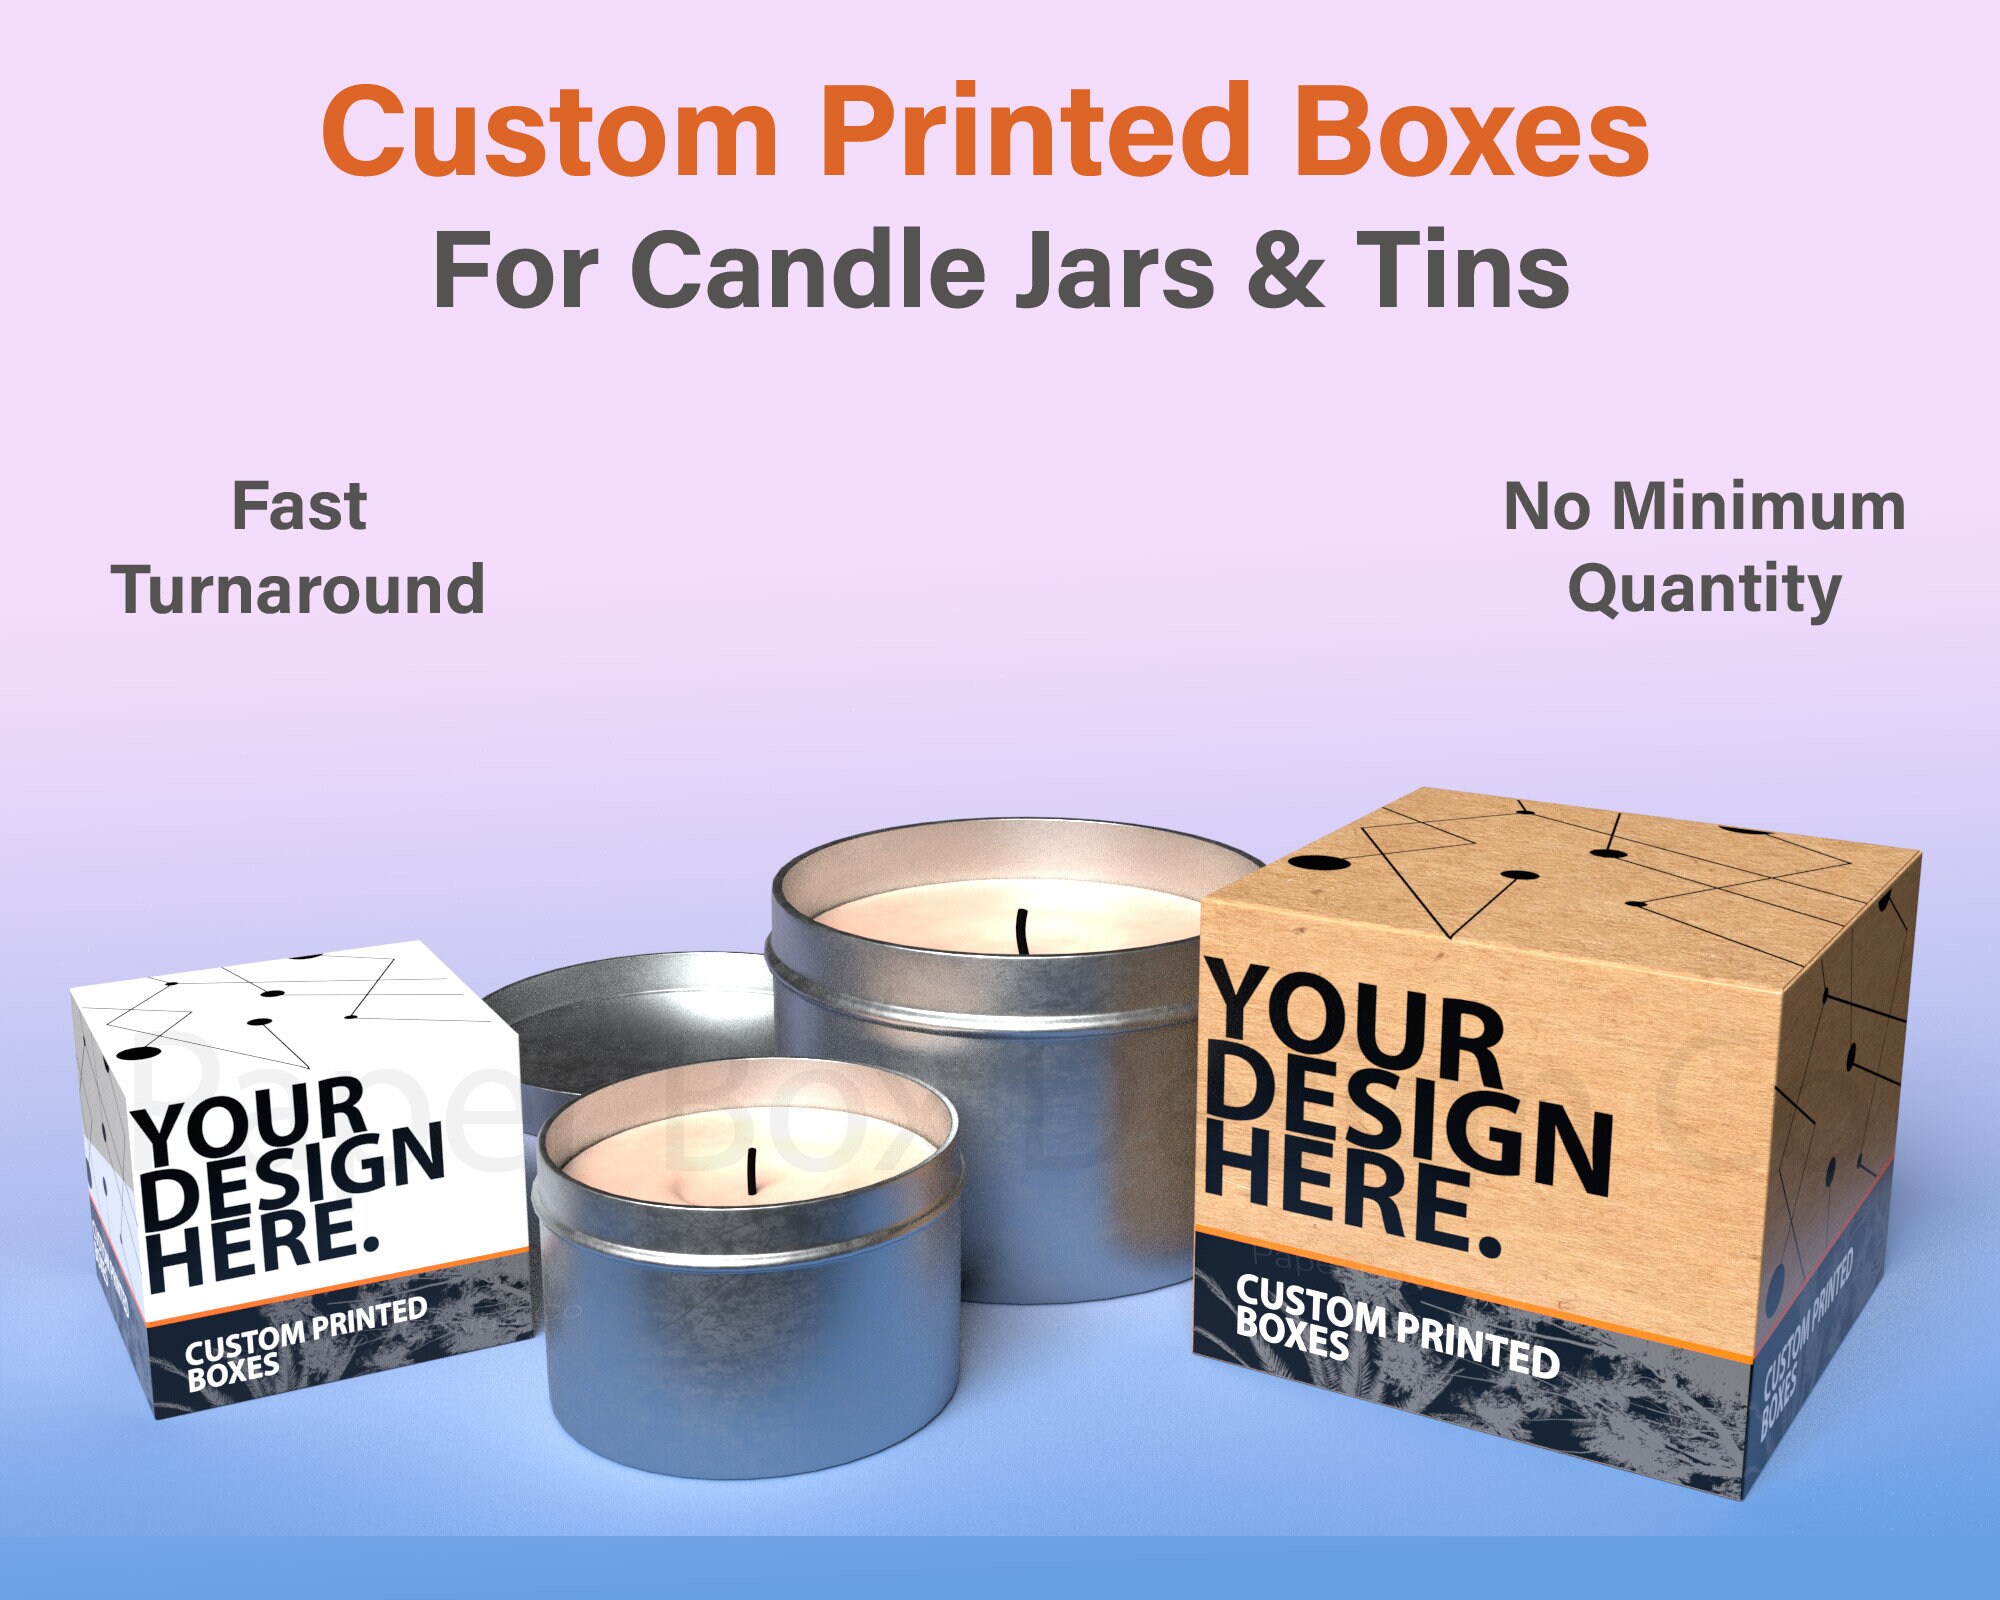 Wedding Favor Boxes, Candle Packaging Box Wholesale, Personalized Gifts,  Candy Boxes, Wedding Gift Box, Custom Gift Box, Cute Gift Box 